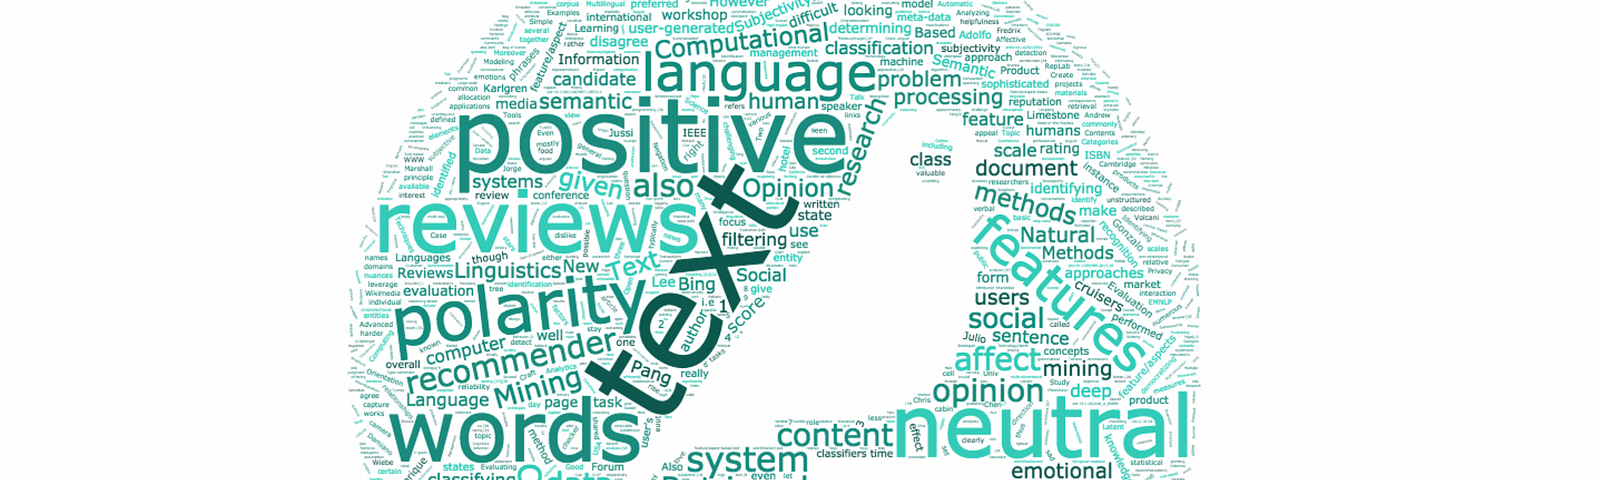 Word cloud of the sentiment analysis article on Wikipedia